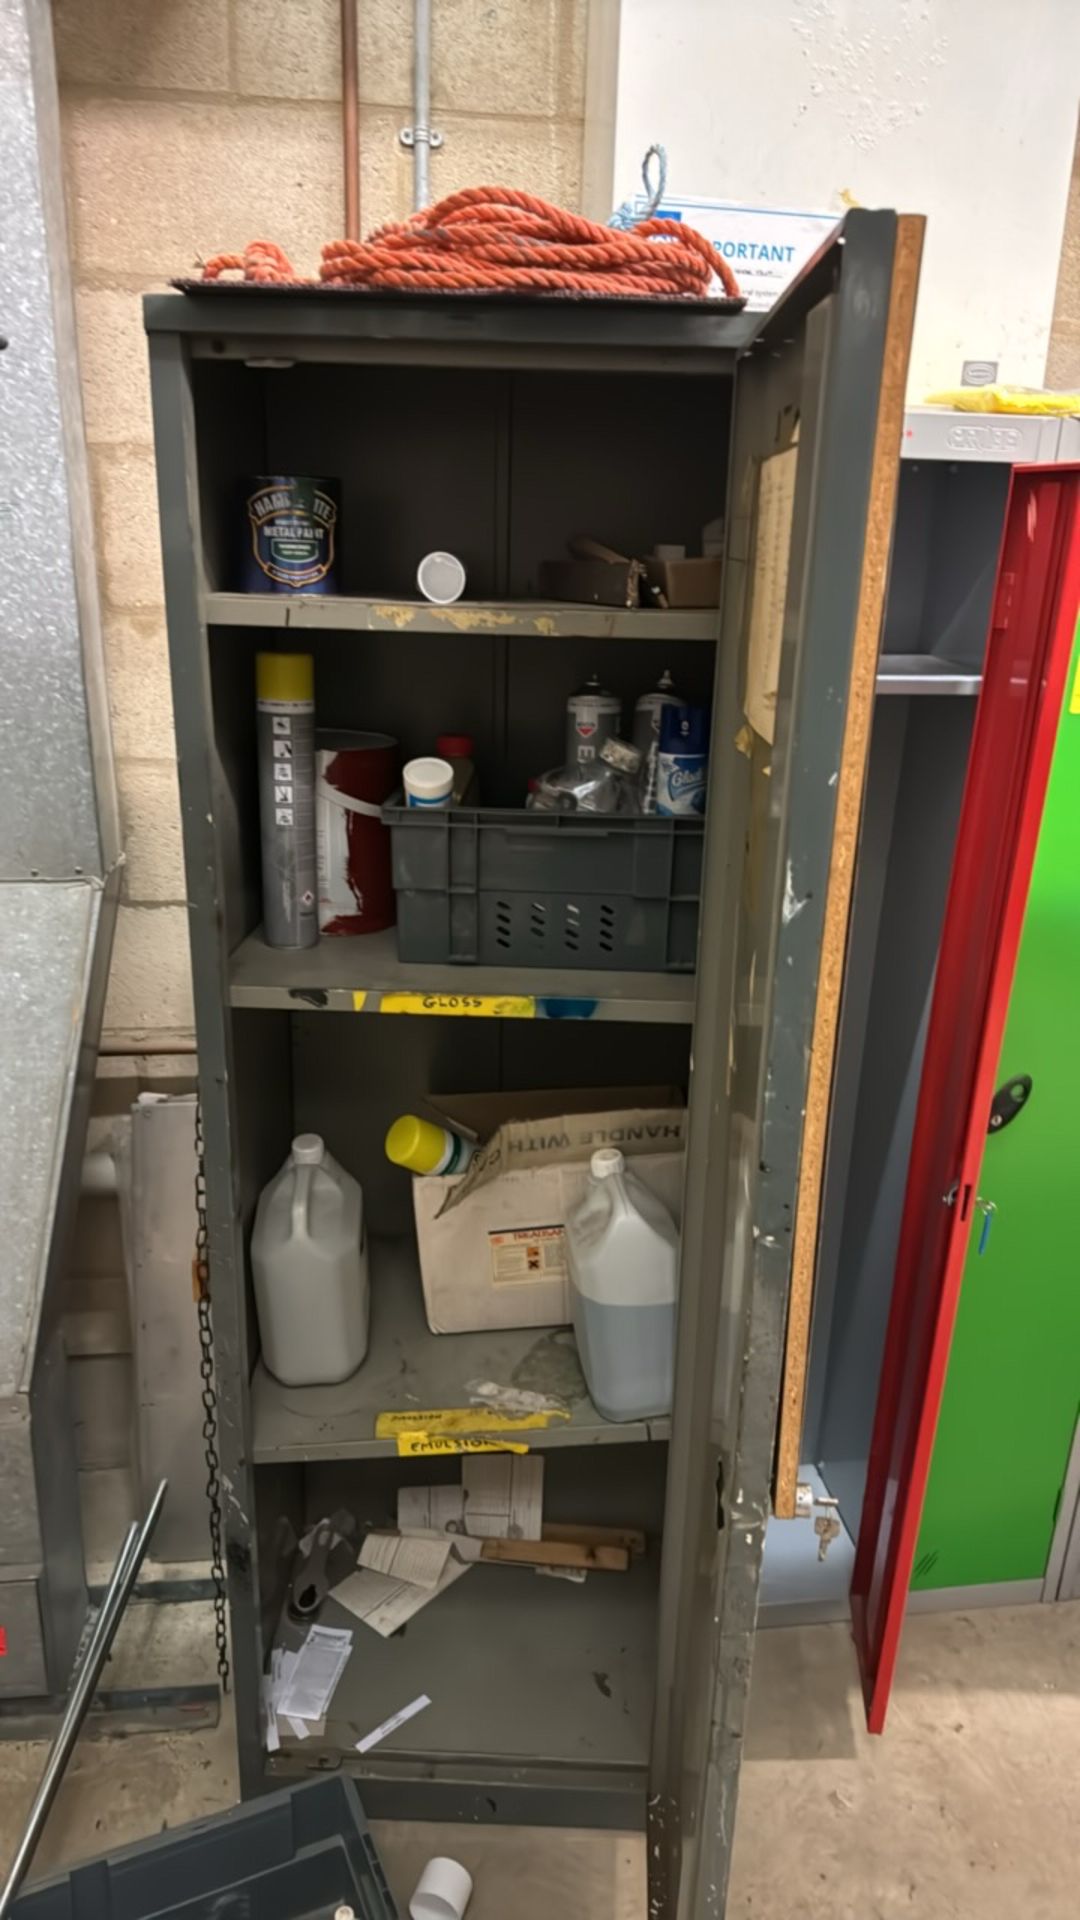 Contents Of Upper Maintenance Room - Image 7 of 11